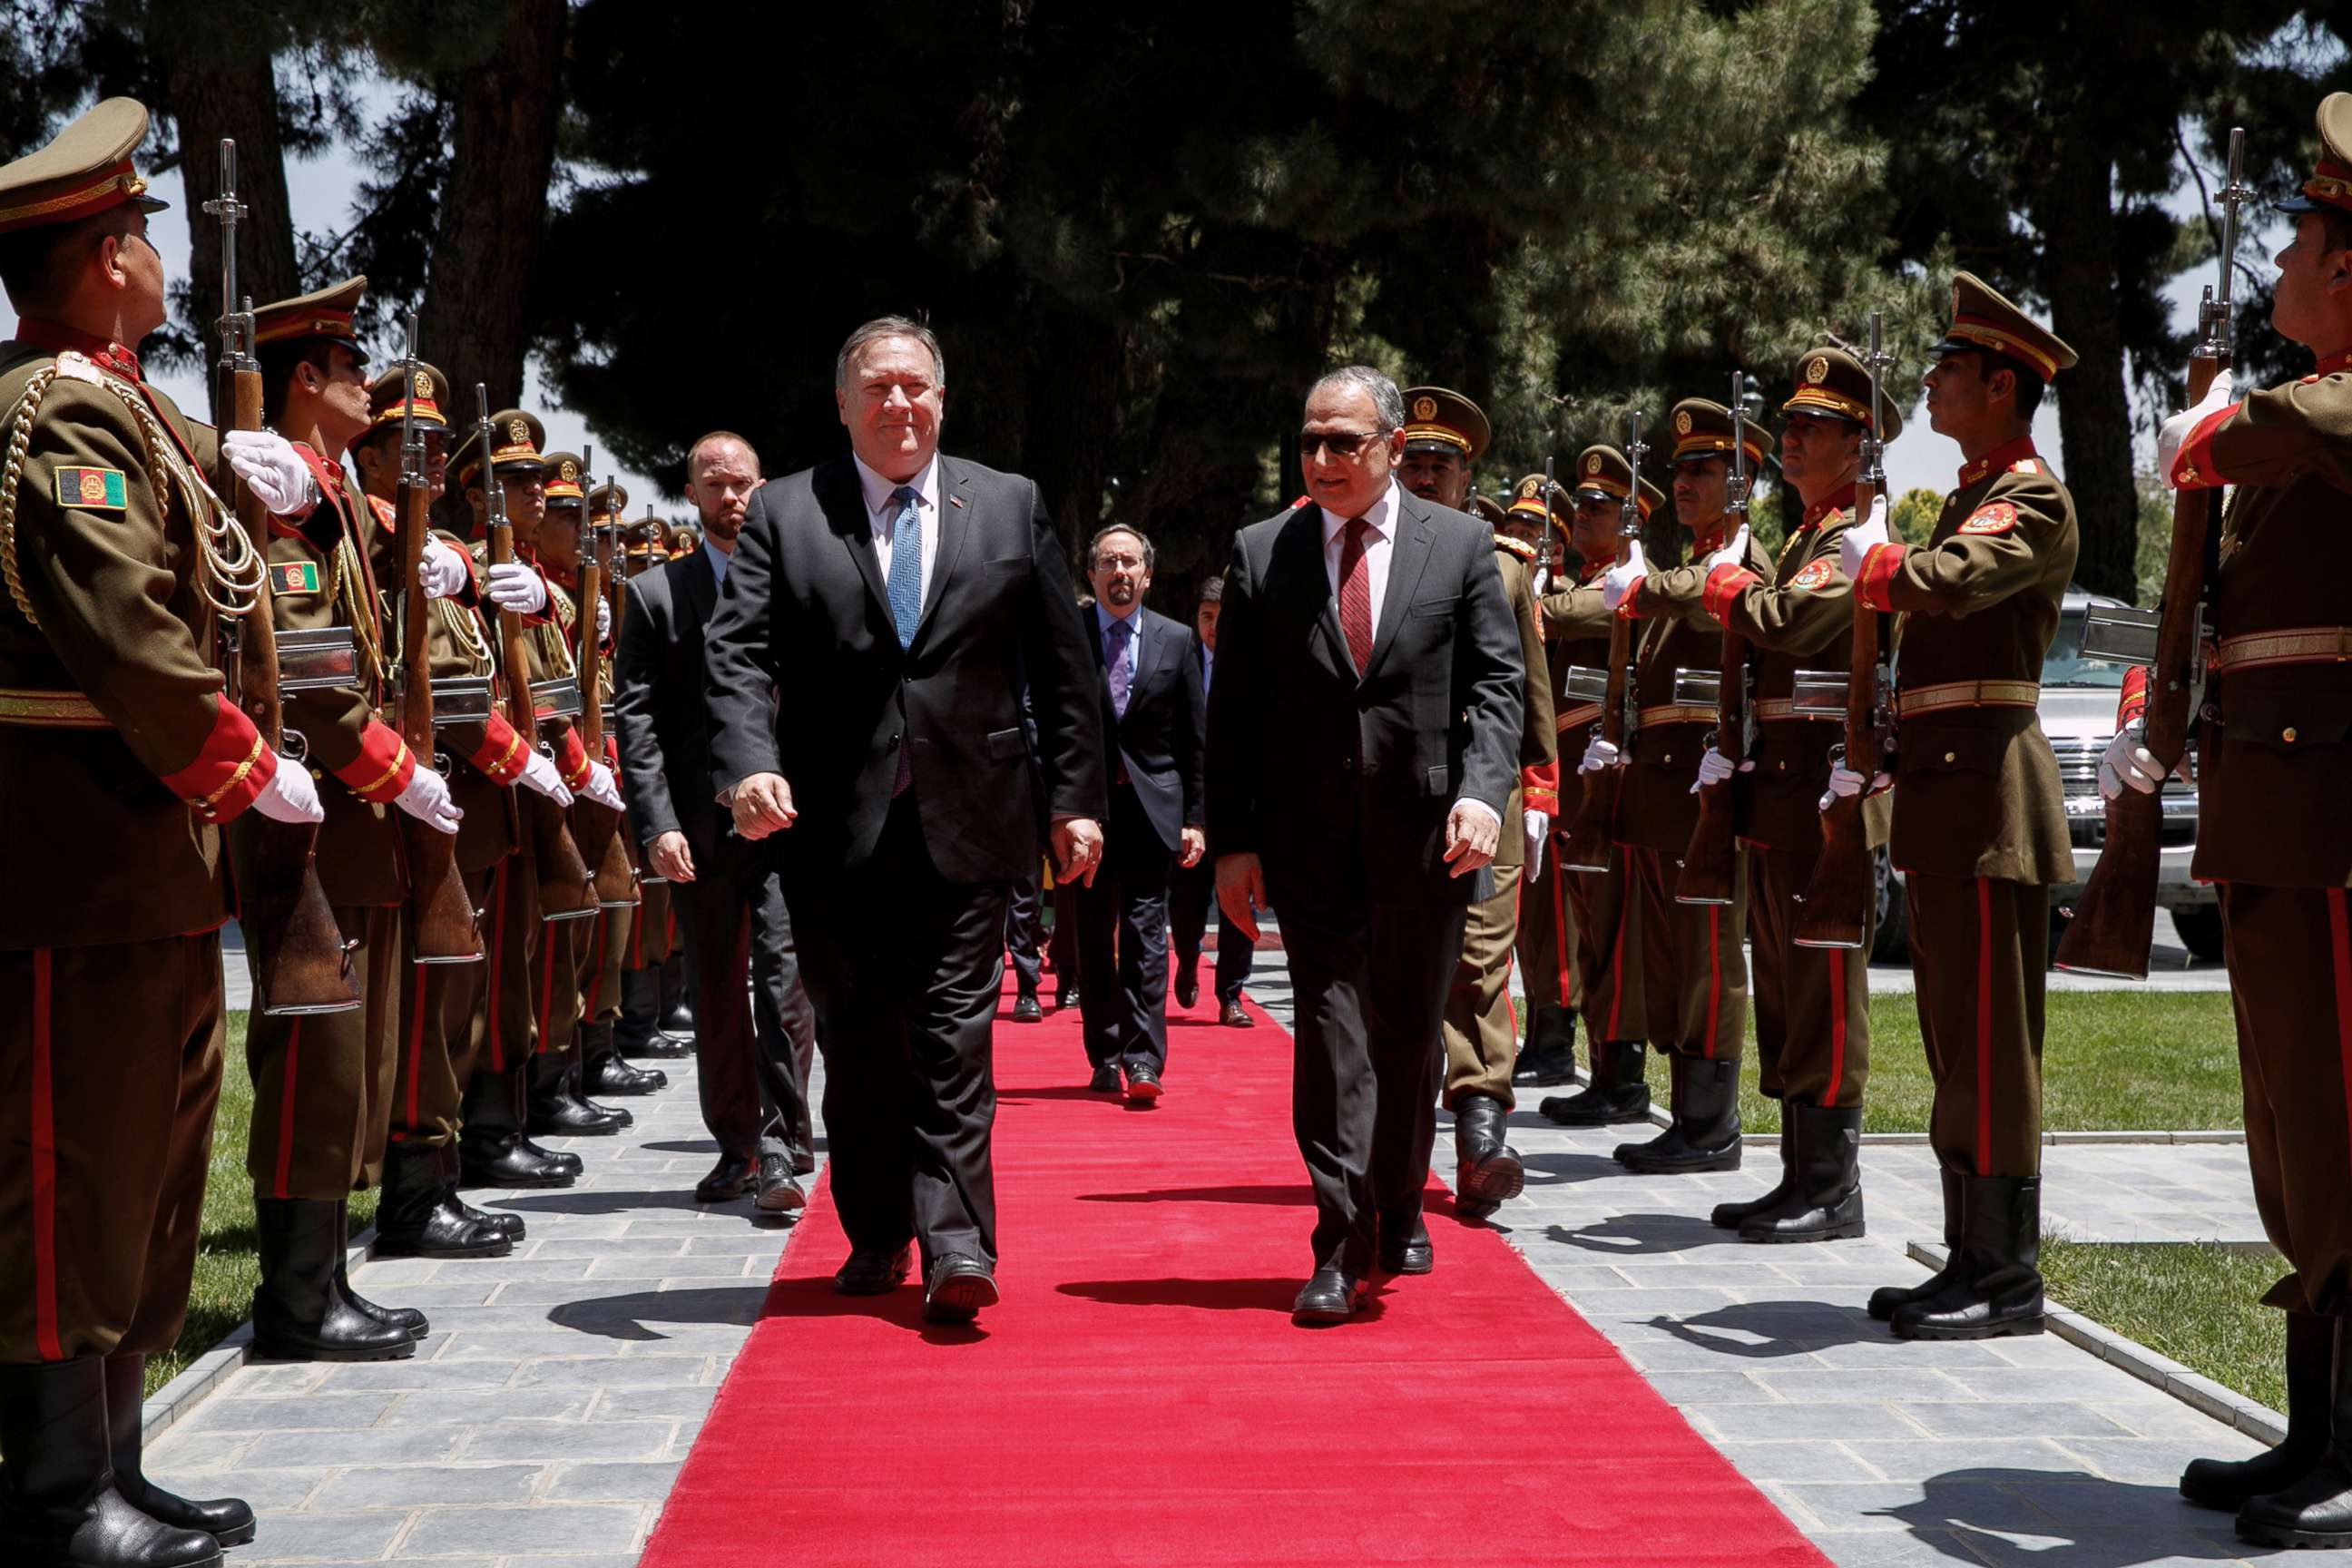 PHOTO: Secretary of State Mike Pompeo walks with Afghan President Ashraf Ghani's Chief of Staff Abdul Salam Rahimi, as he arrives at the Presidential Palace in Kabul, Afghanistan, June 25, 2019.